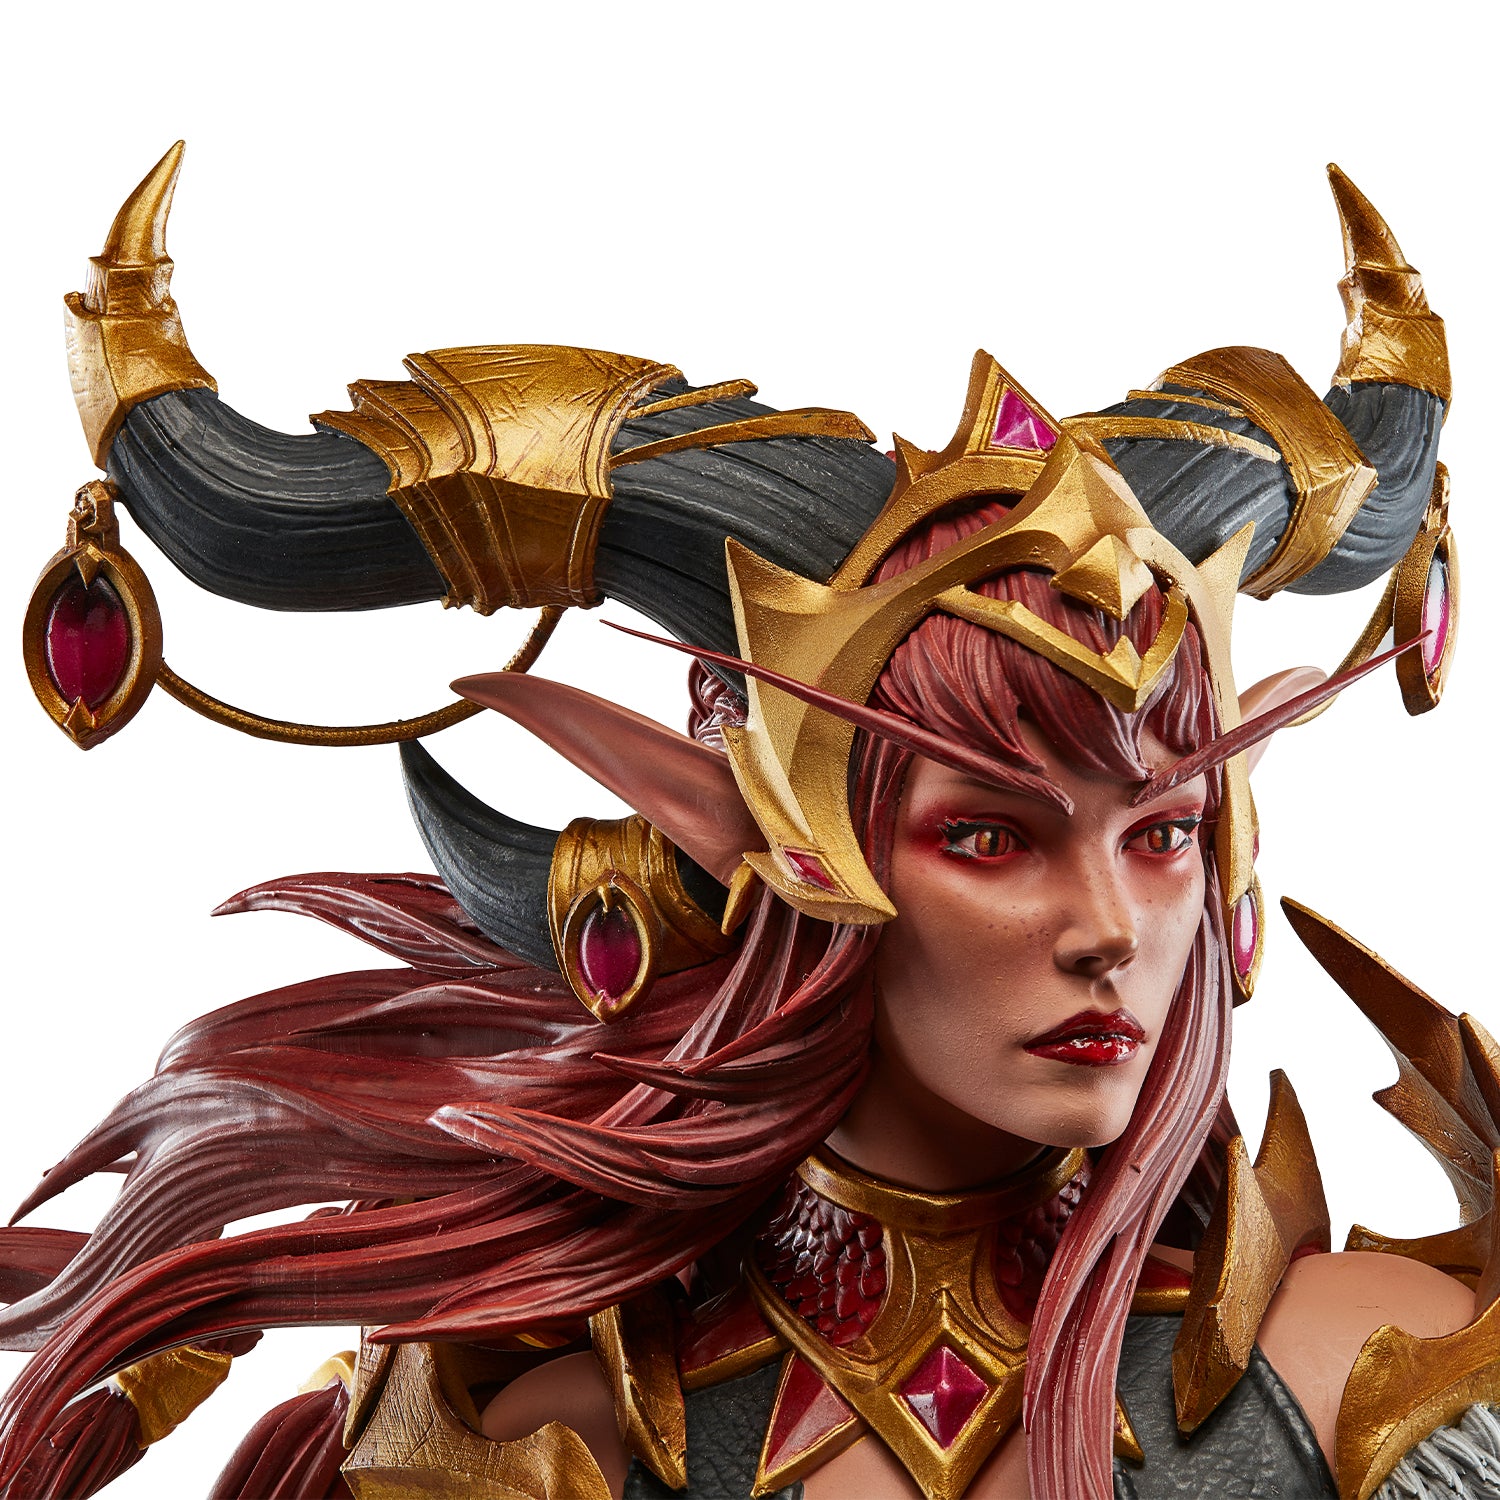 World of Warcraft Alexstrasza 52cm Statue - Close Up Face View